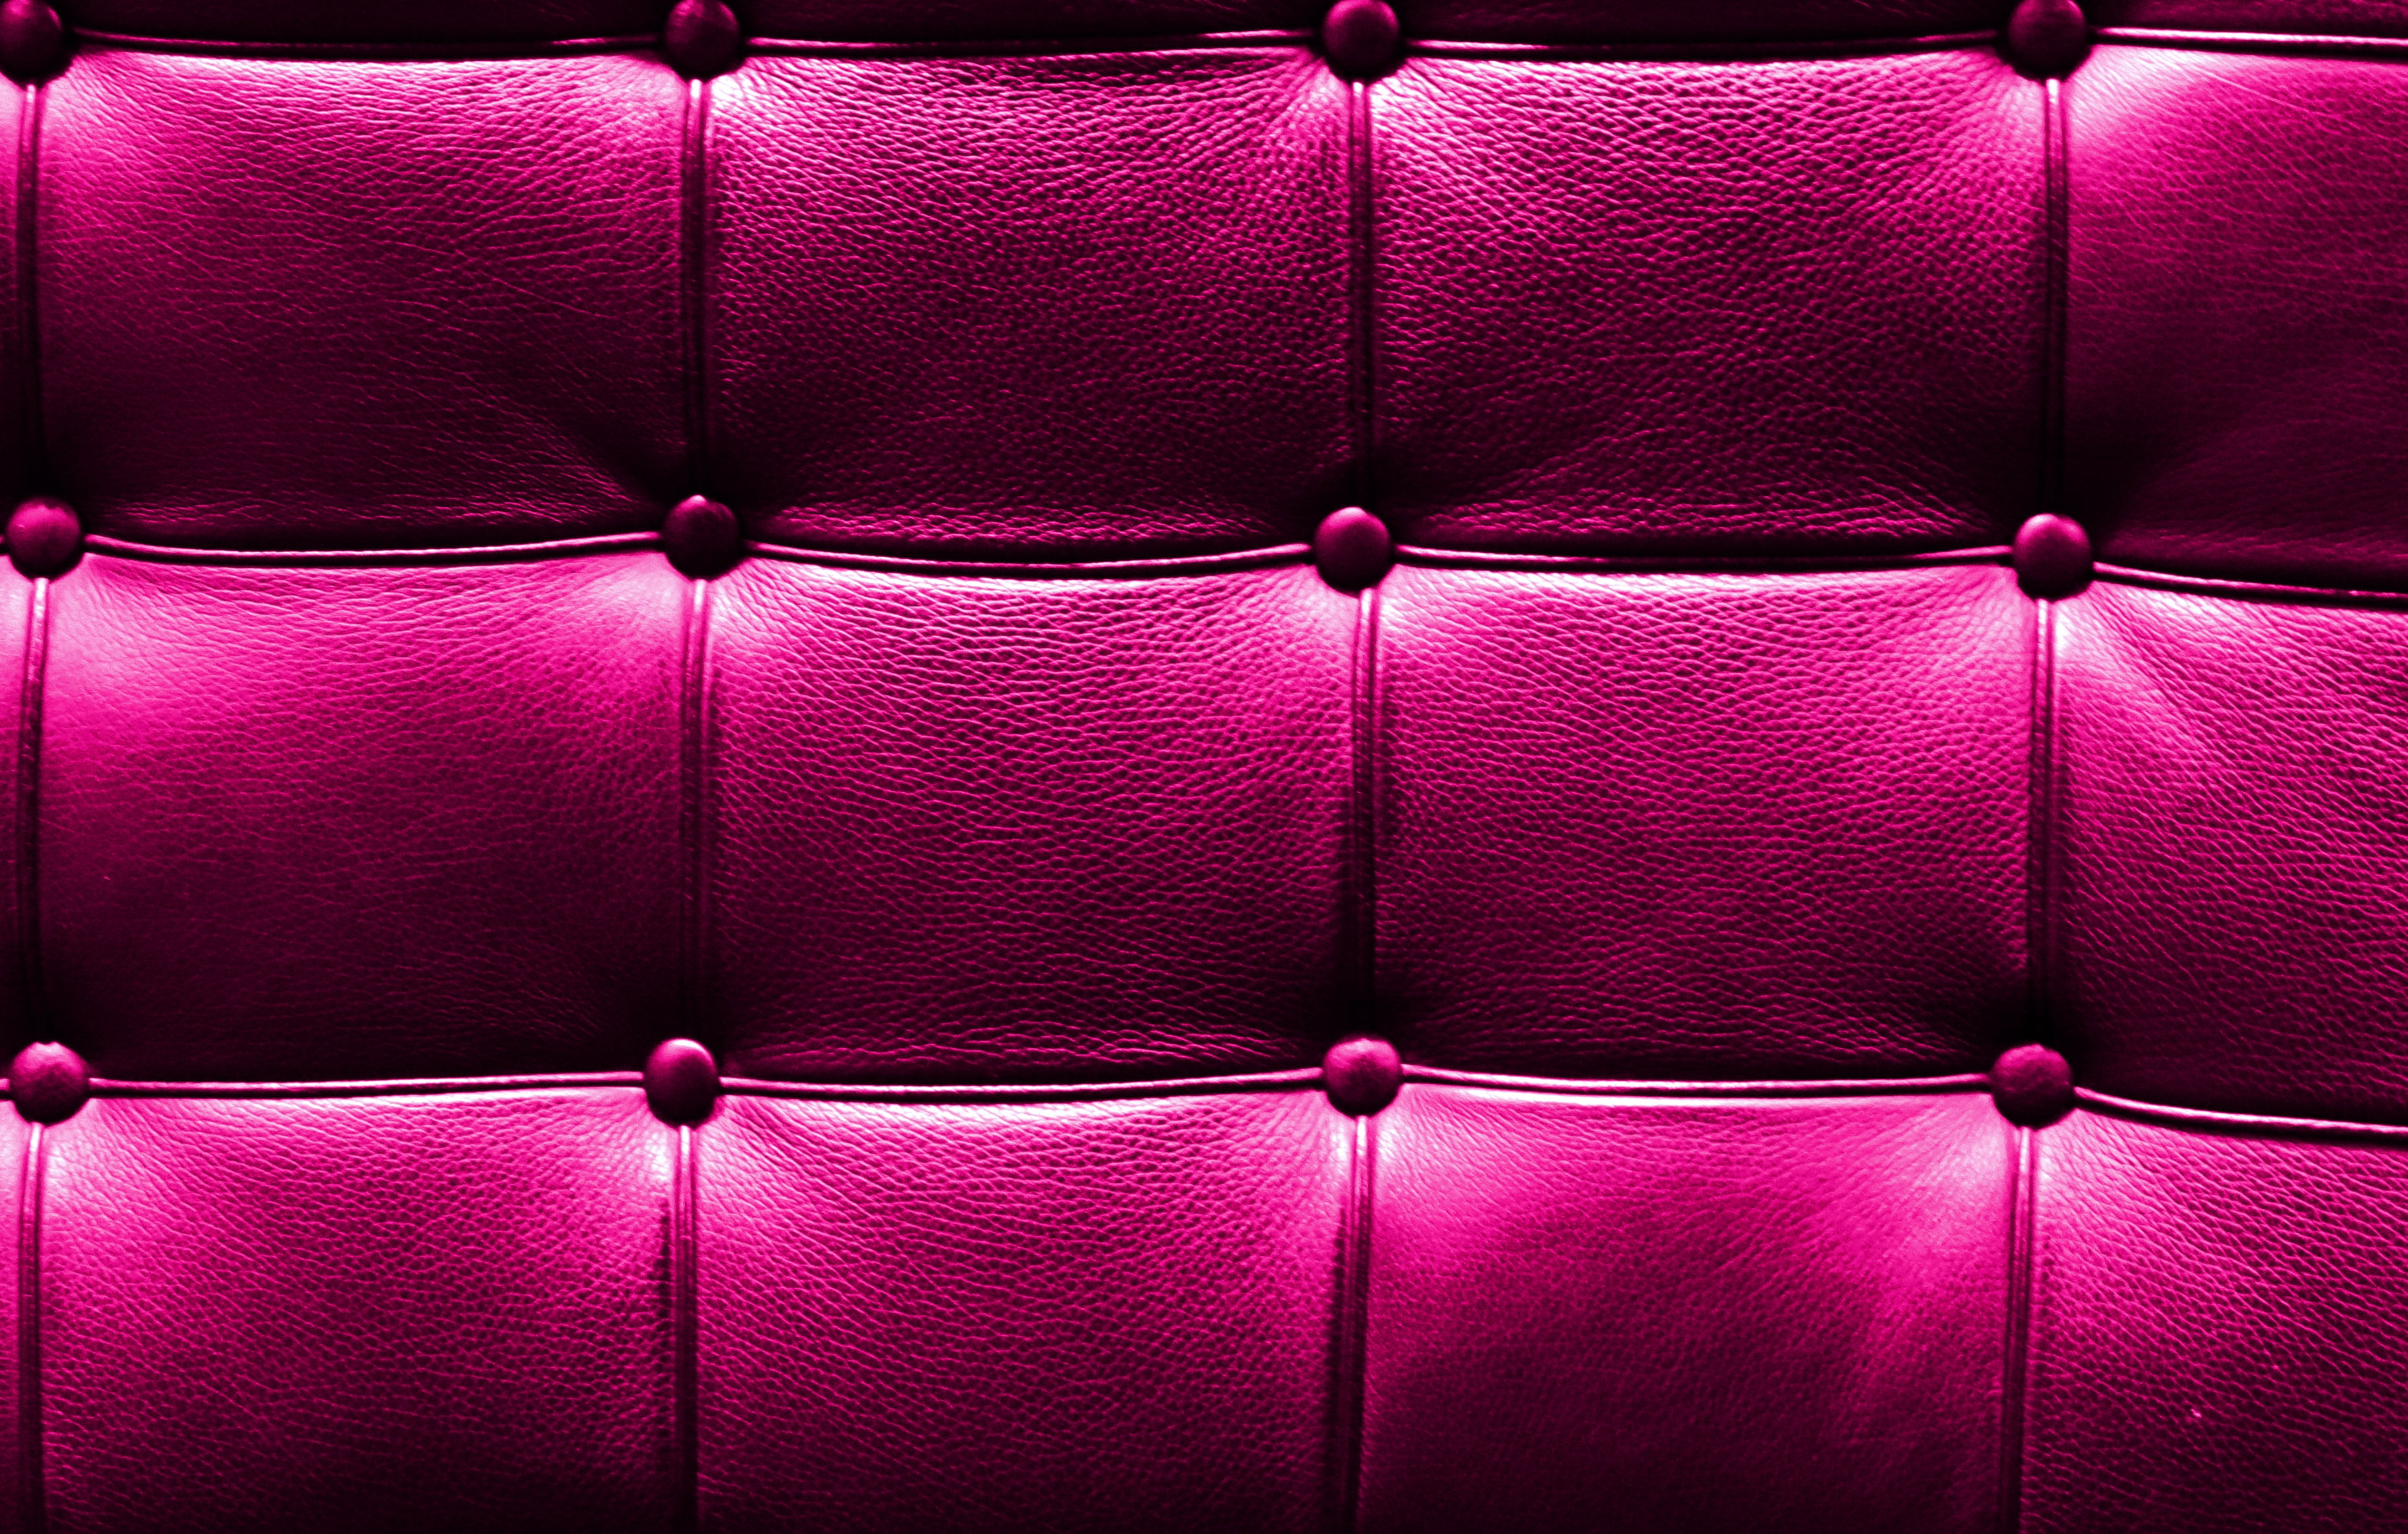 Tufted Pink Leather Hd Wallpaper, Pink Leather Wallpaper